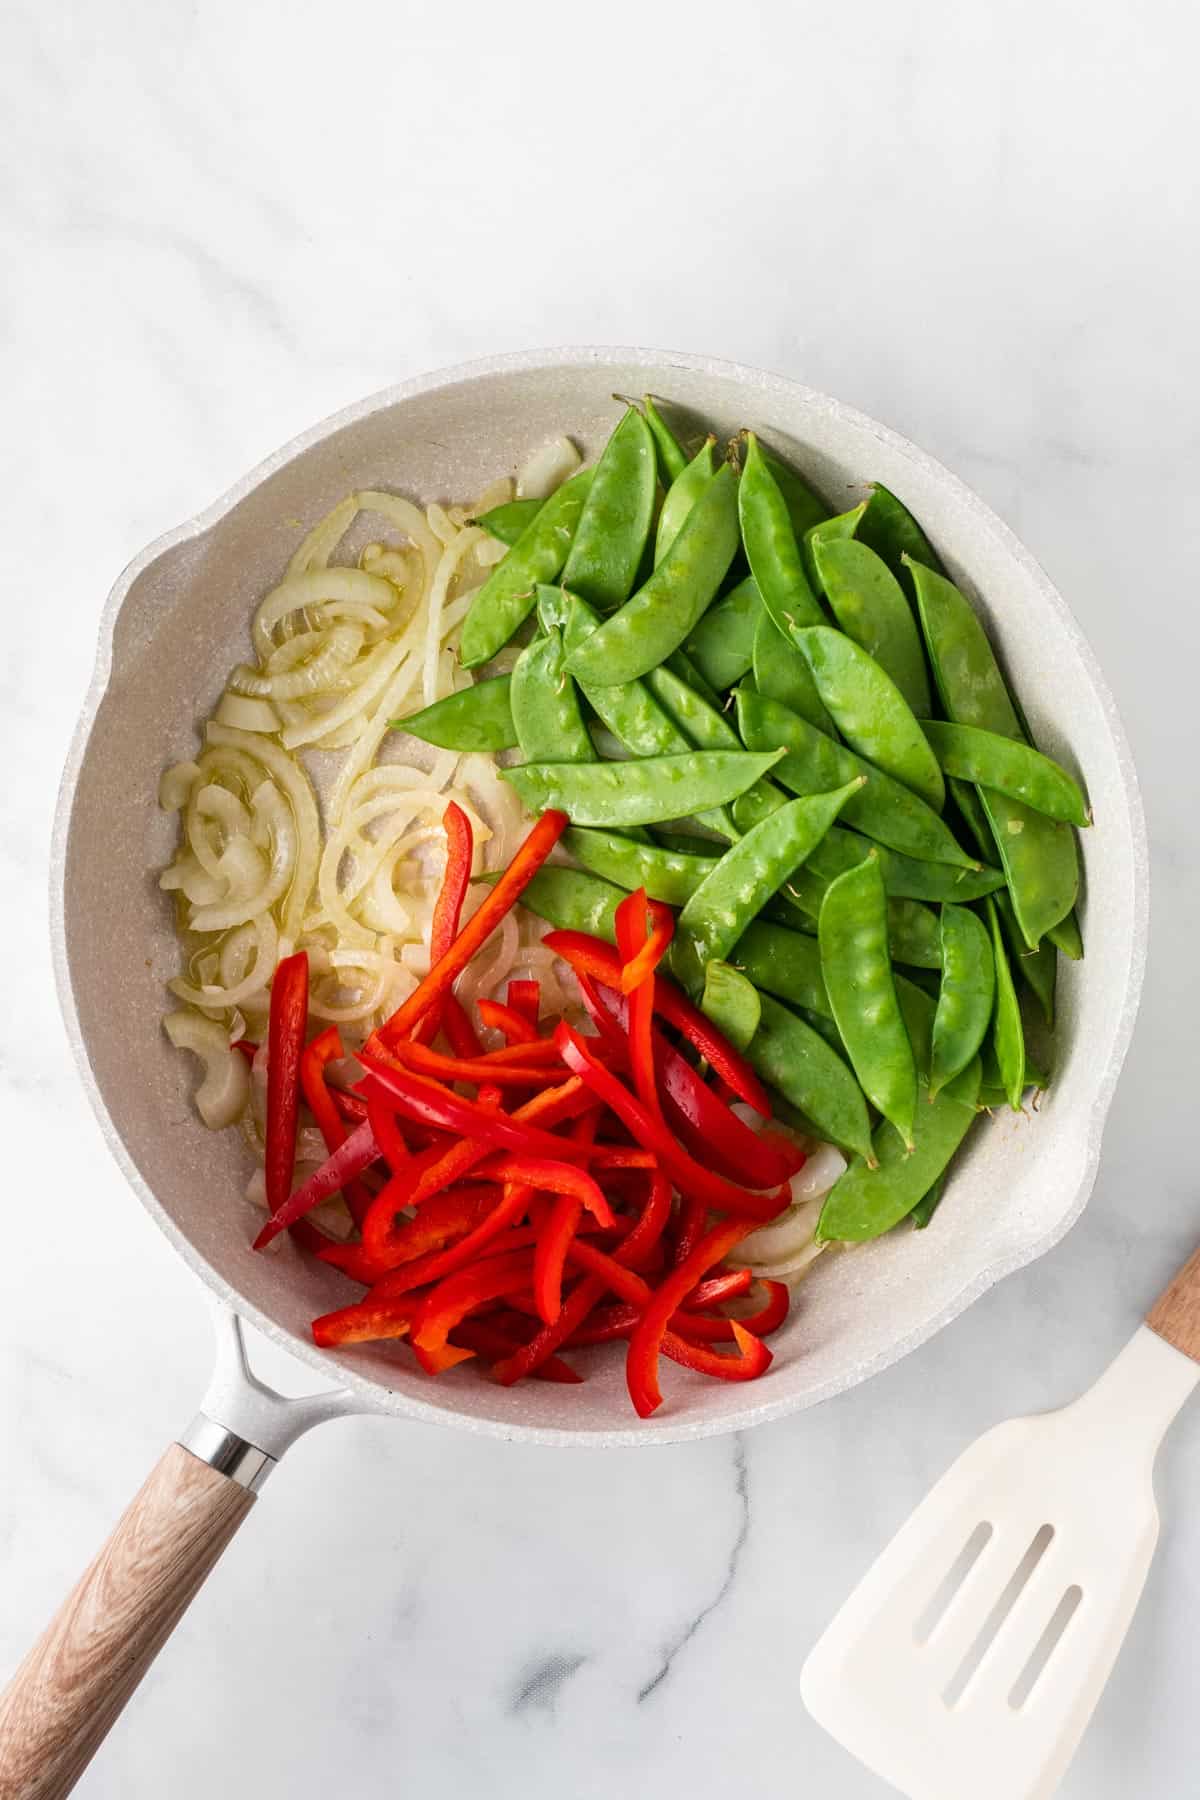 A picture of onions, snap peas, and red pepper slices in a white skillet.